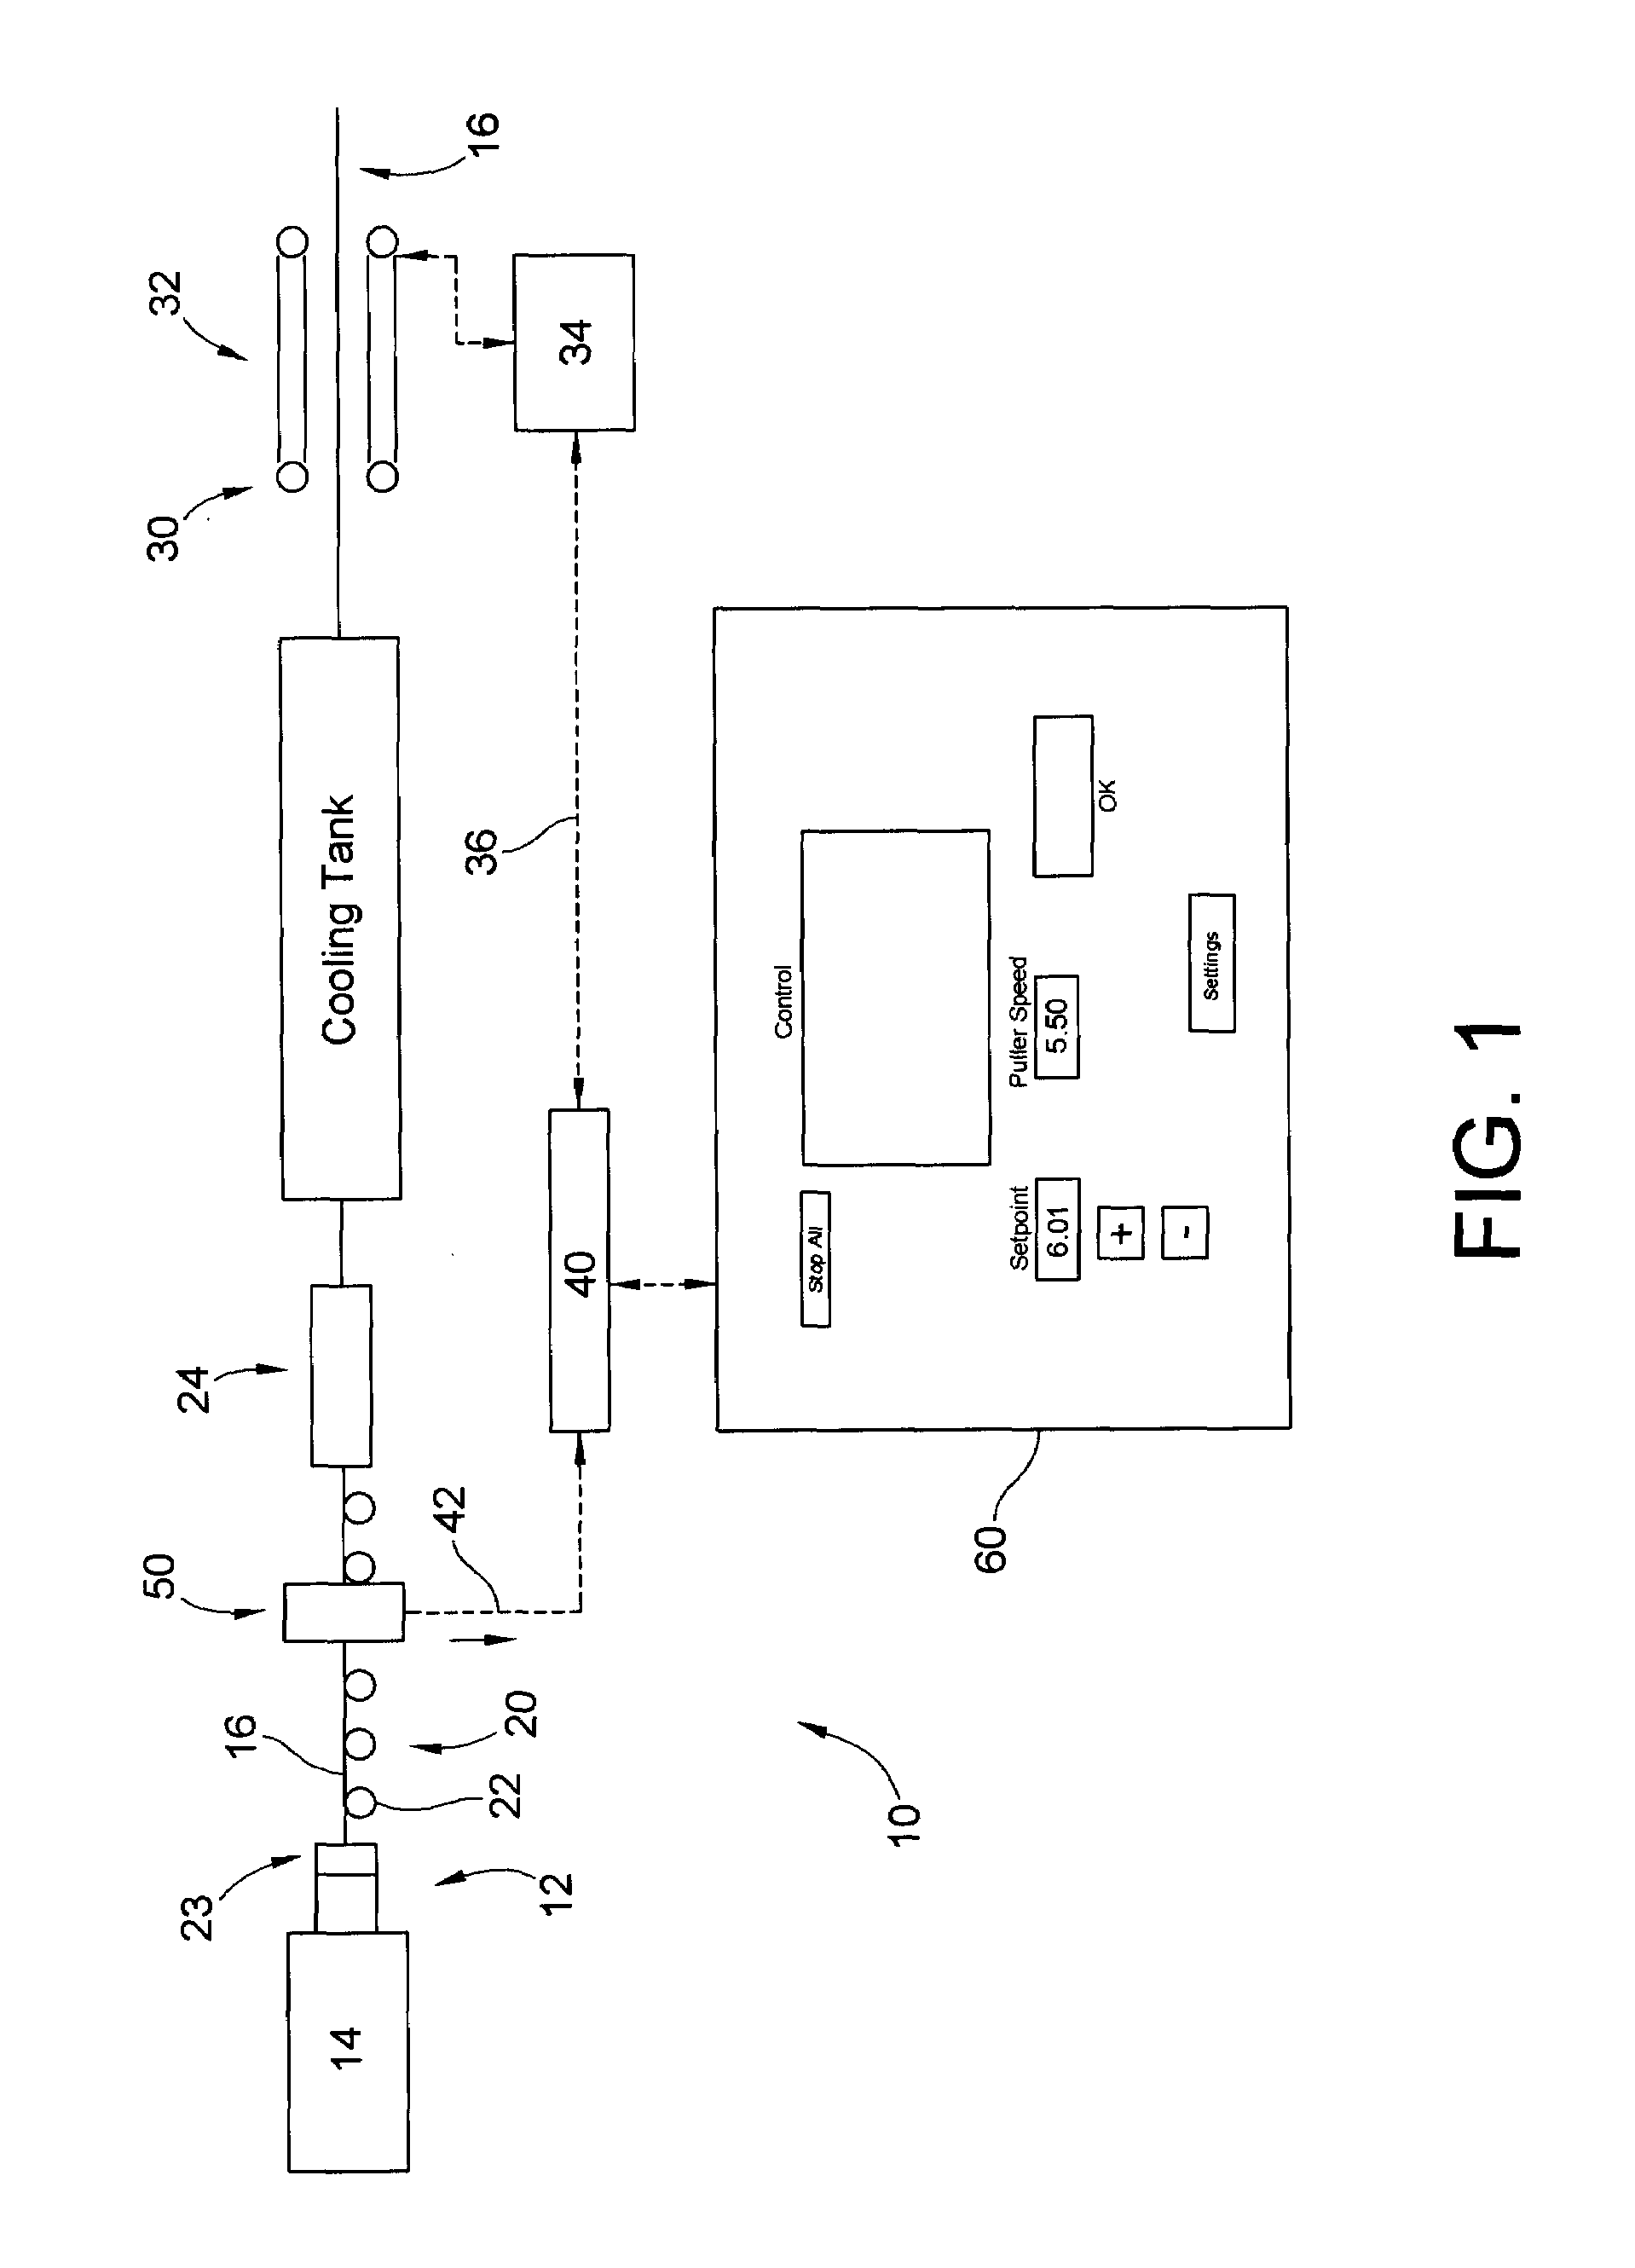 Puller speed control device for monitoring the dimensions of an extruded synthetic wood composition